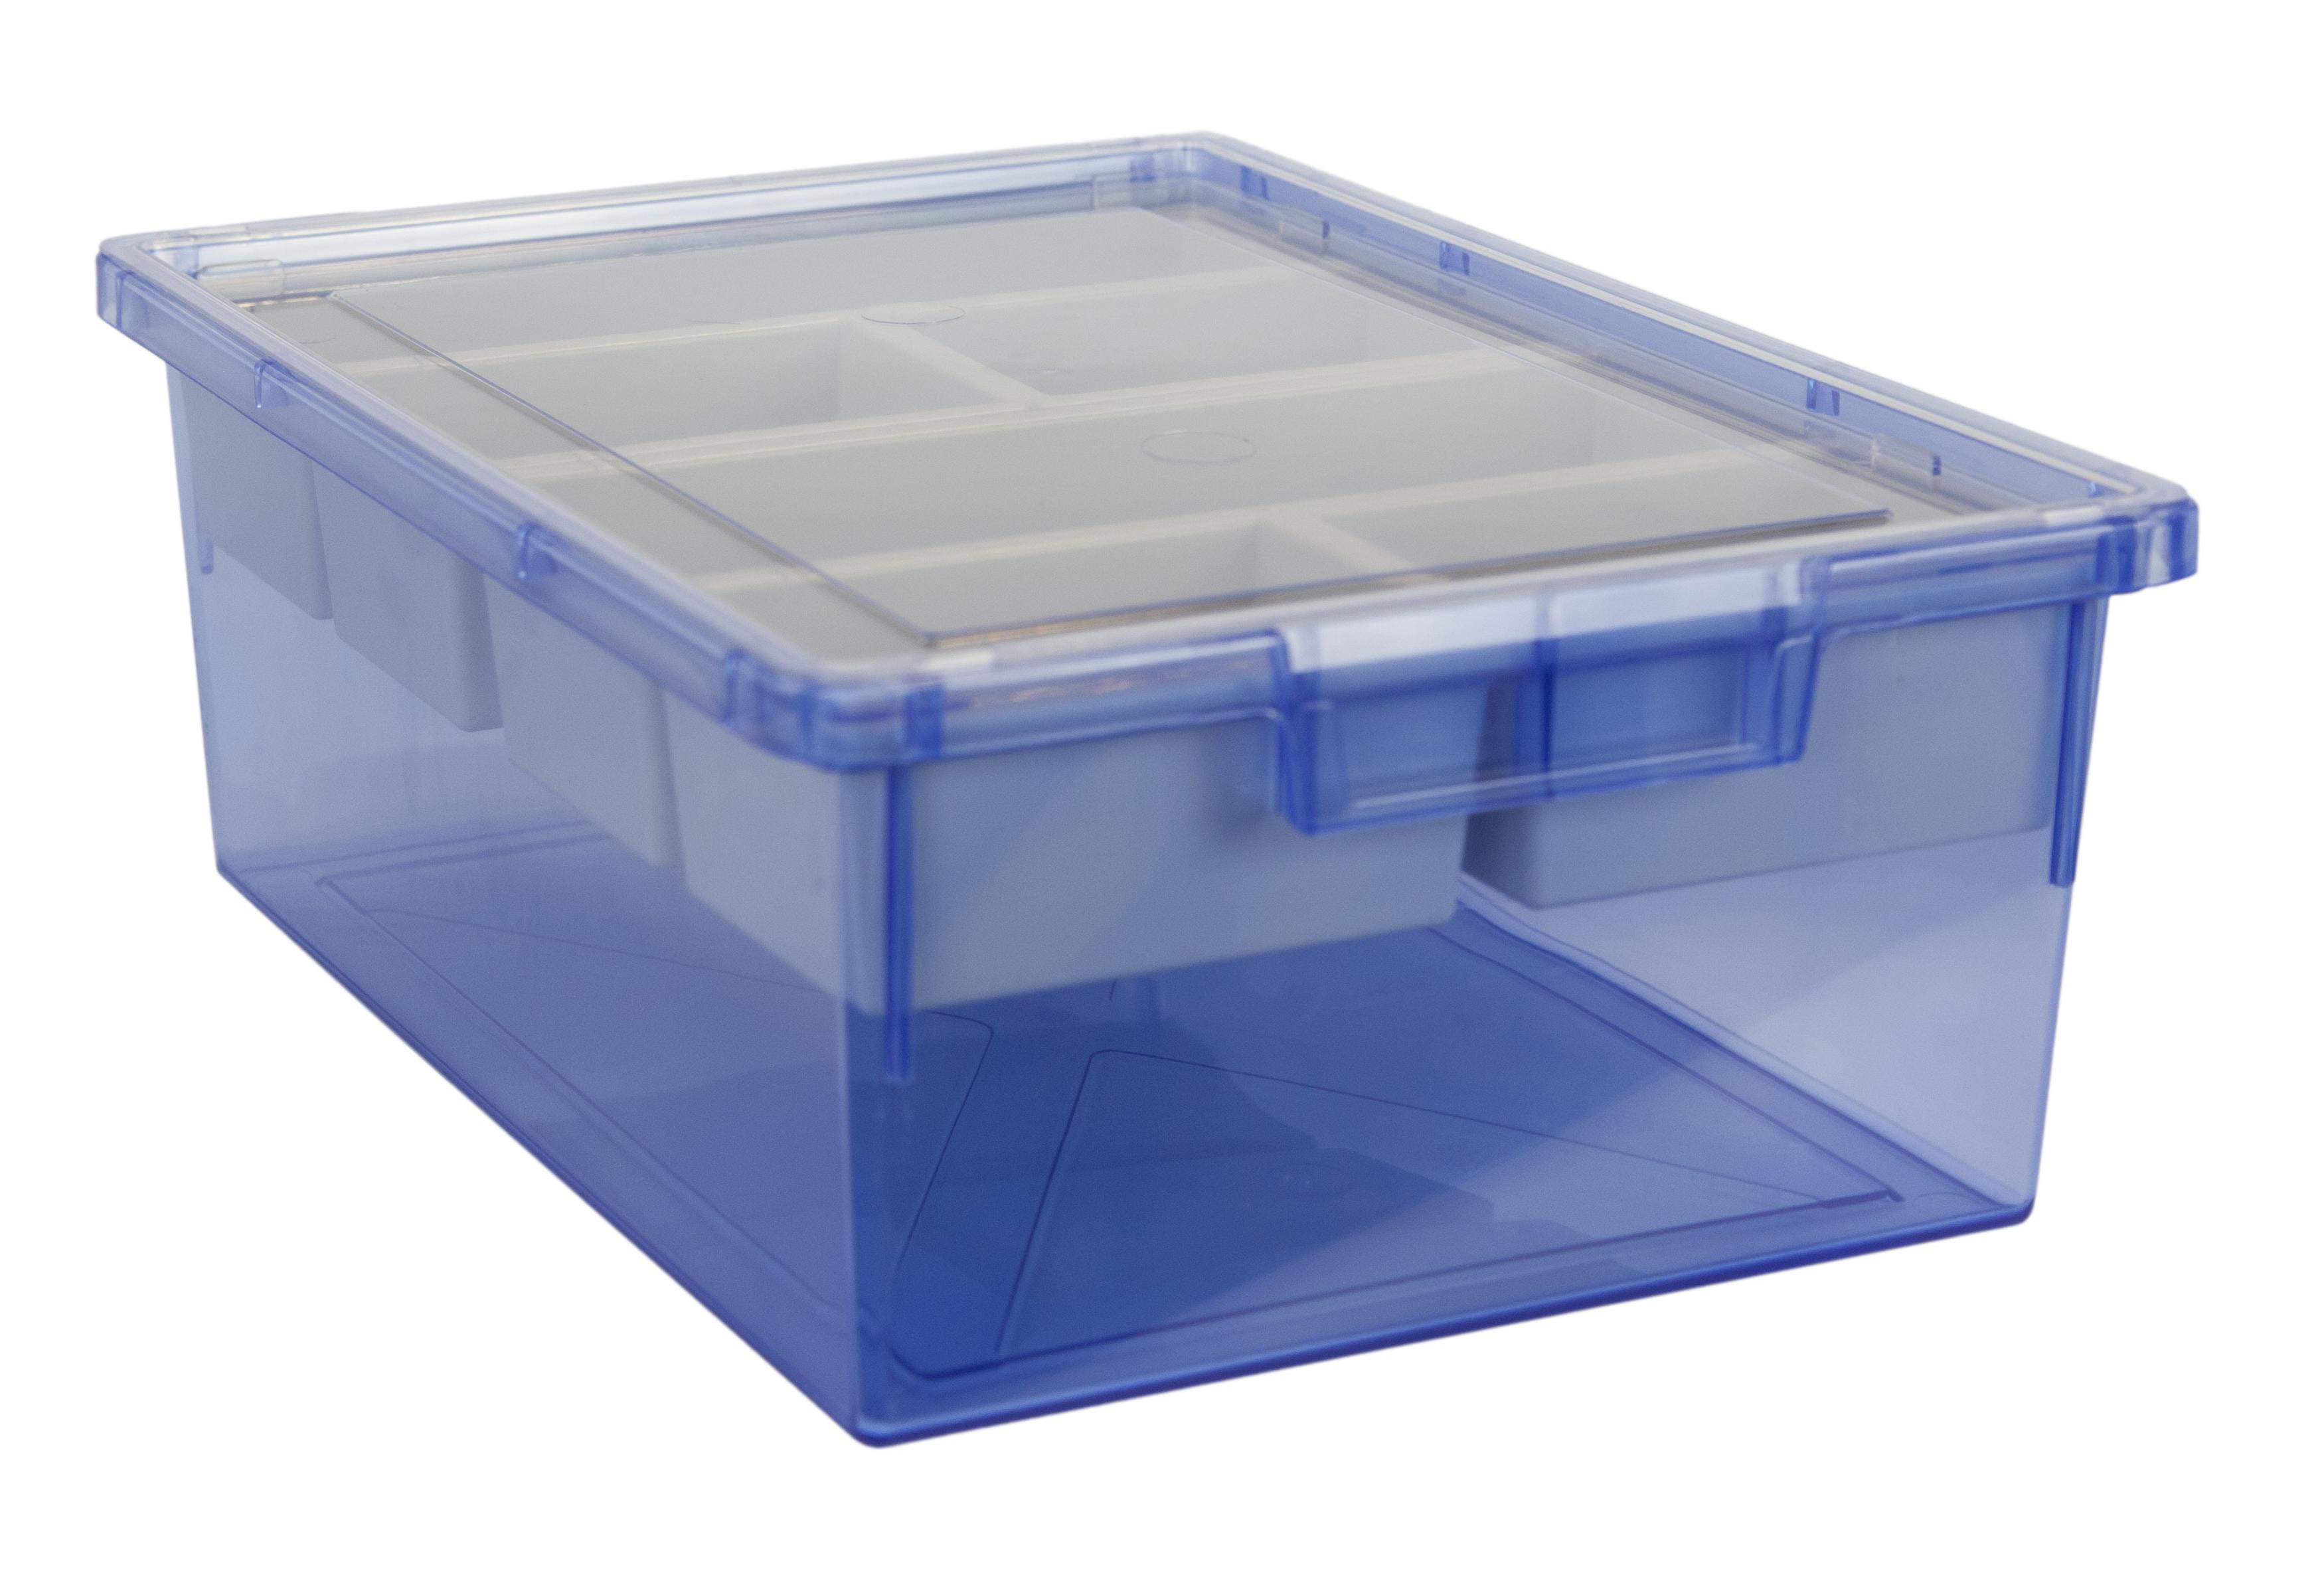  Super Stacker Divided Storage Box with Removable Tray, 10 x 7.5  x 6.5 Inches (37375) : Office Products